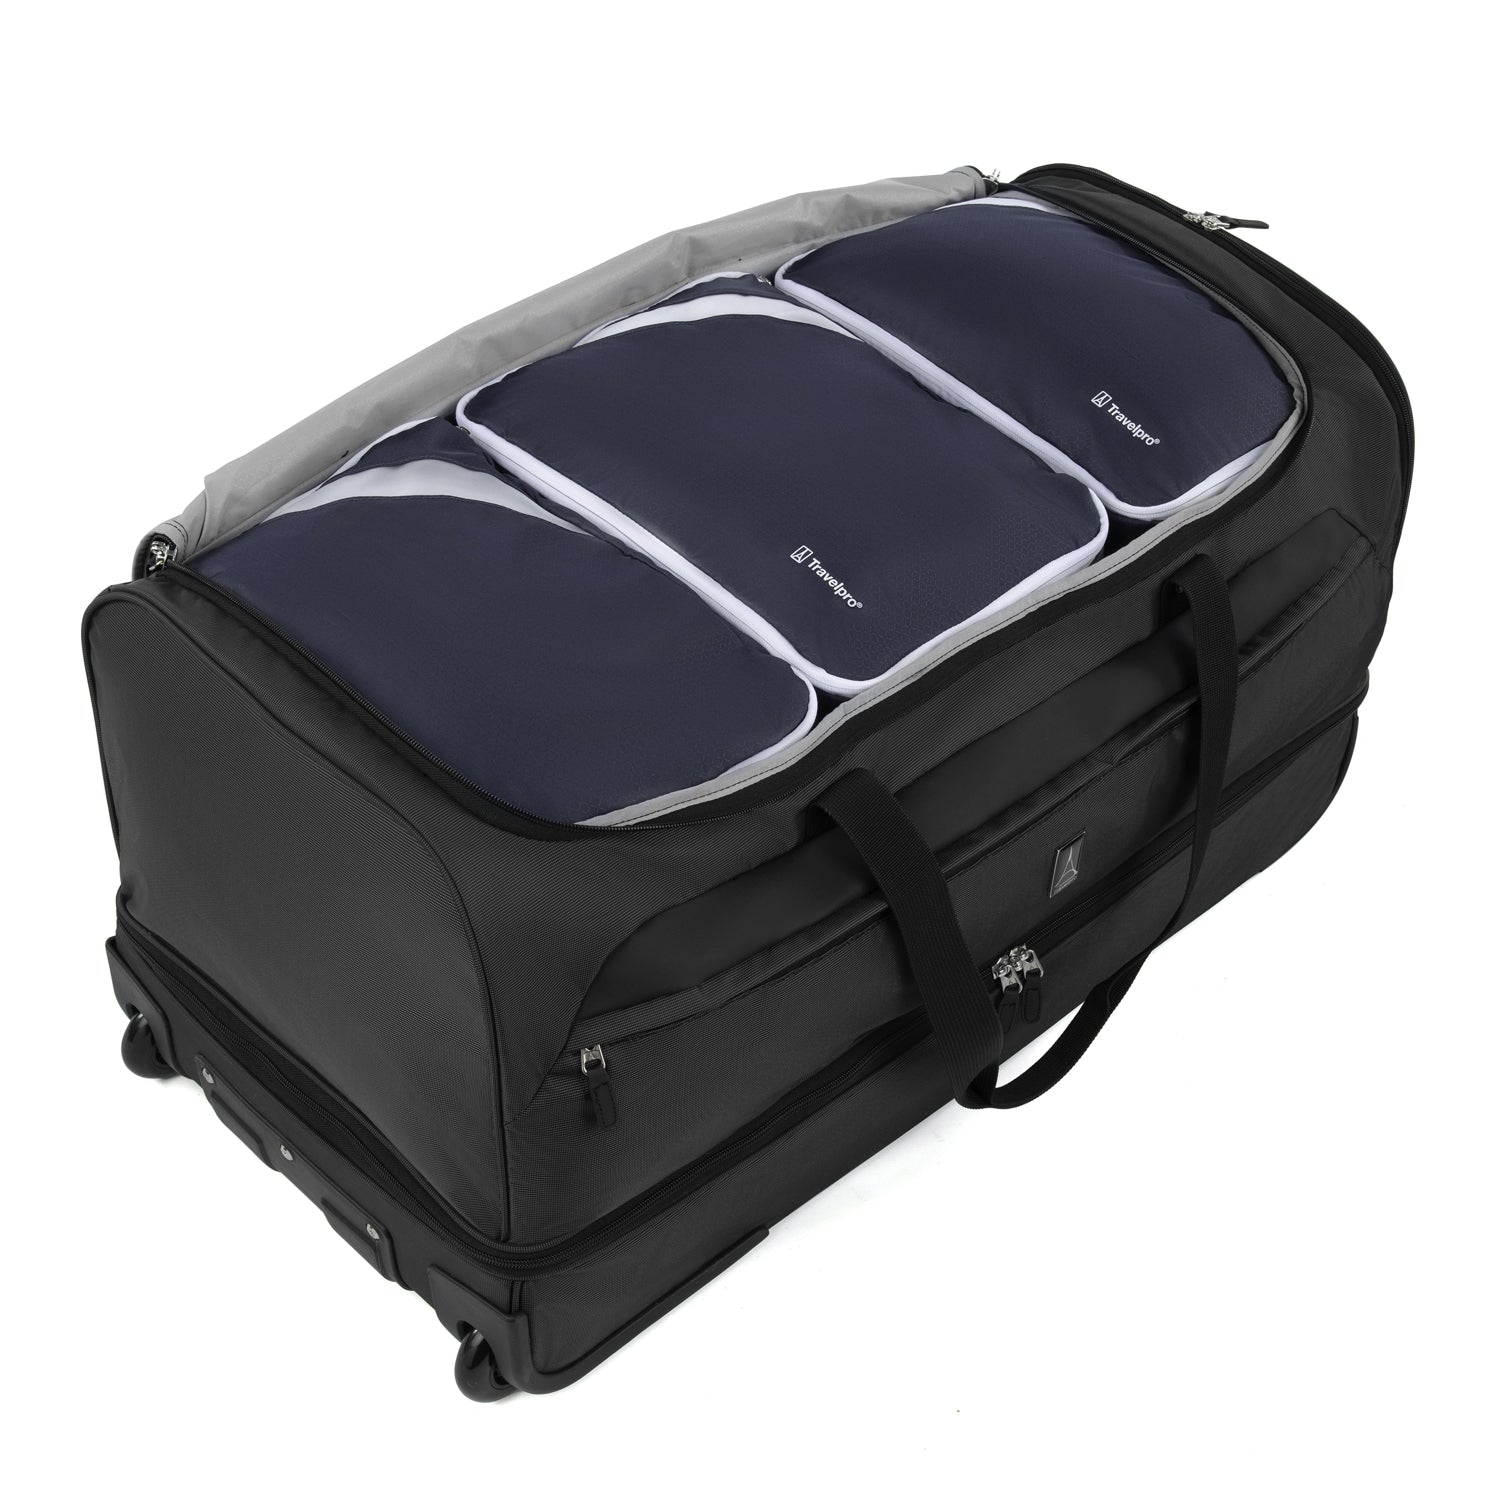 Roadtrip 30 Rolling Duffel Bag with Packing Cubes | Travelpro